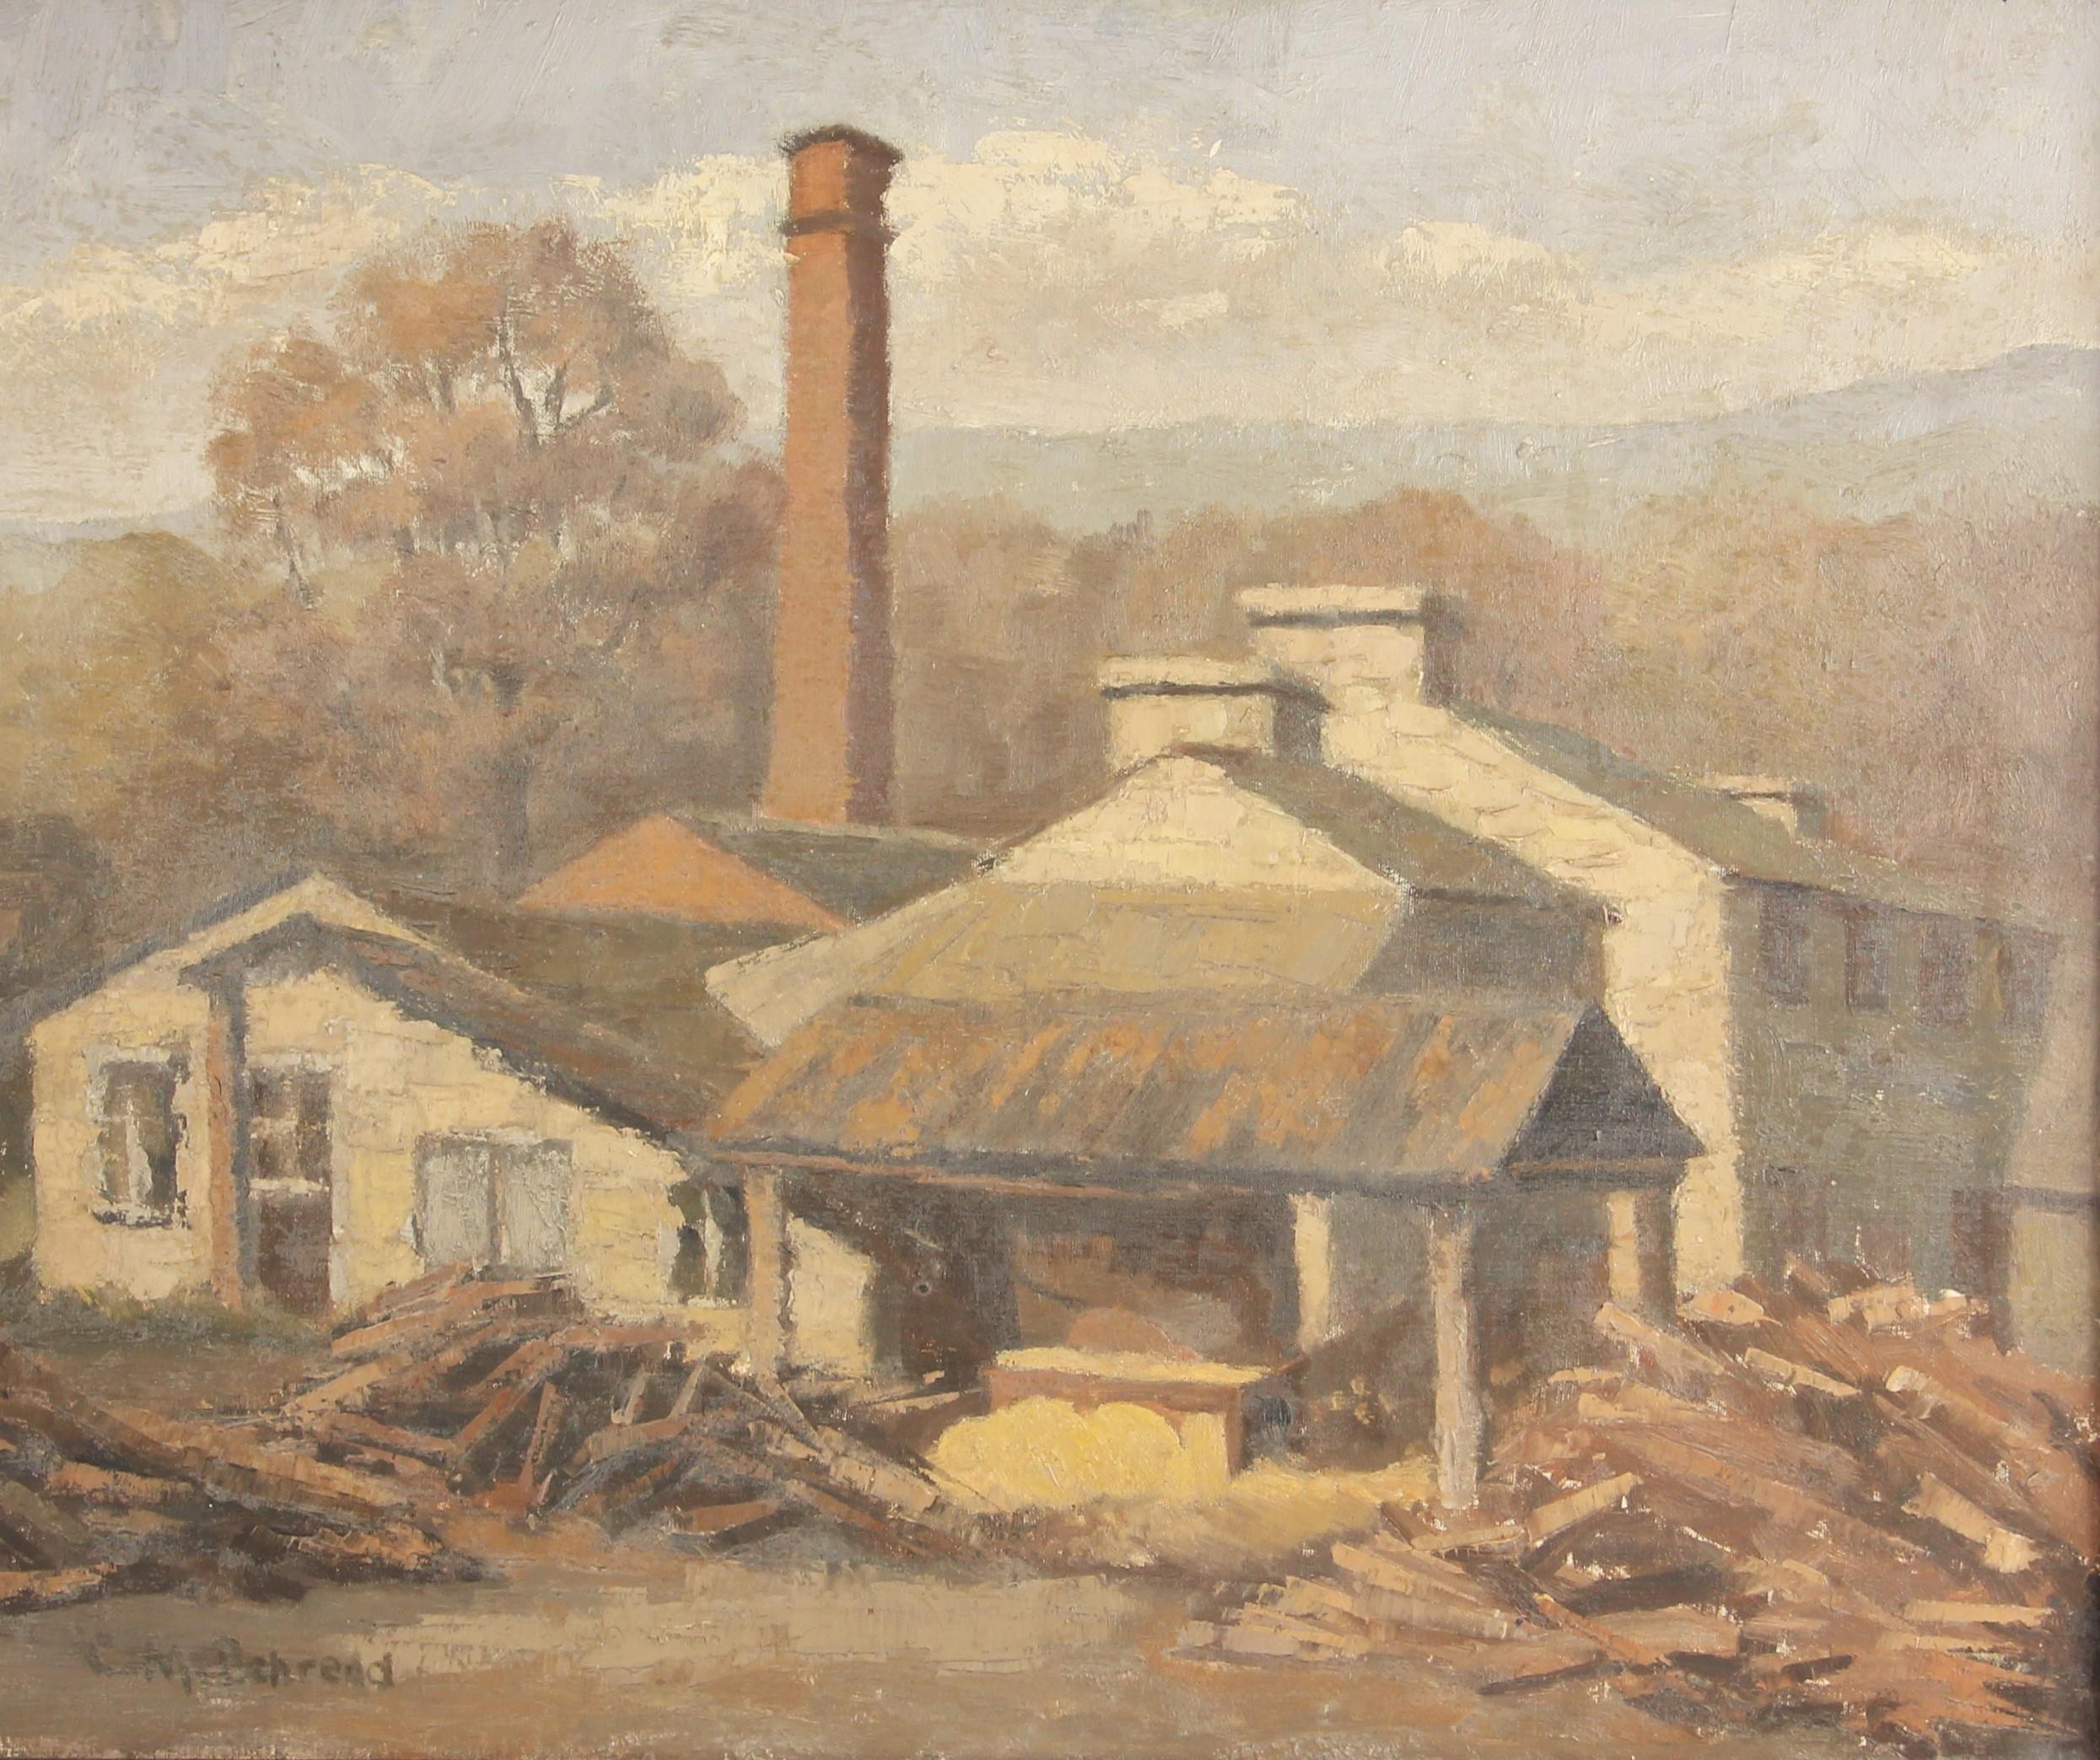 C M Behrend (British school, 20th century), A saw mill, Oil on canvas, Signed lower left, artist's - Image 2 of 3